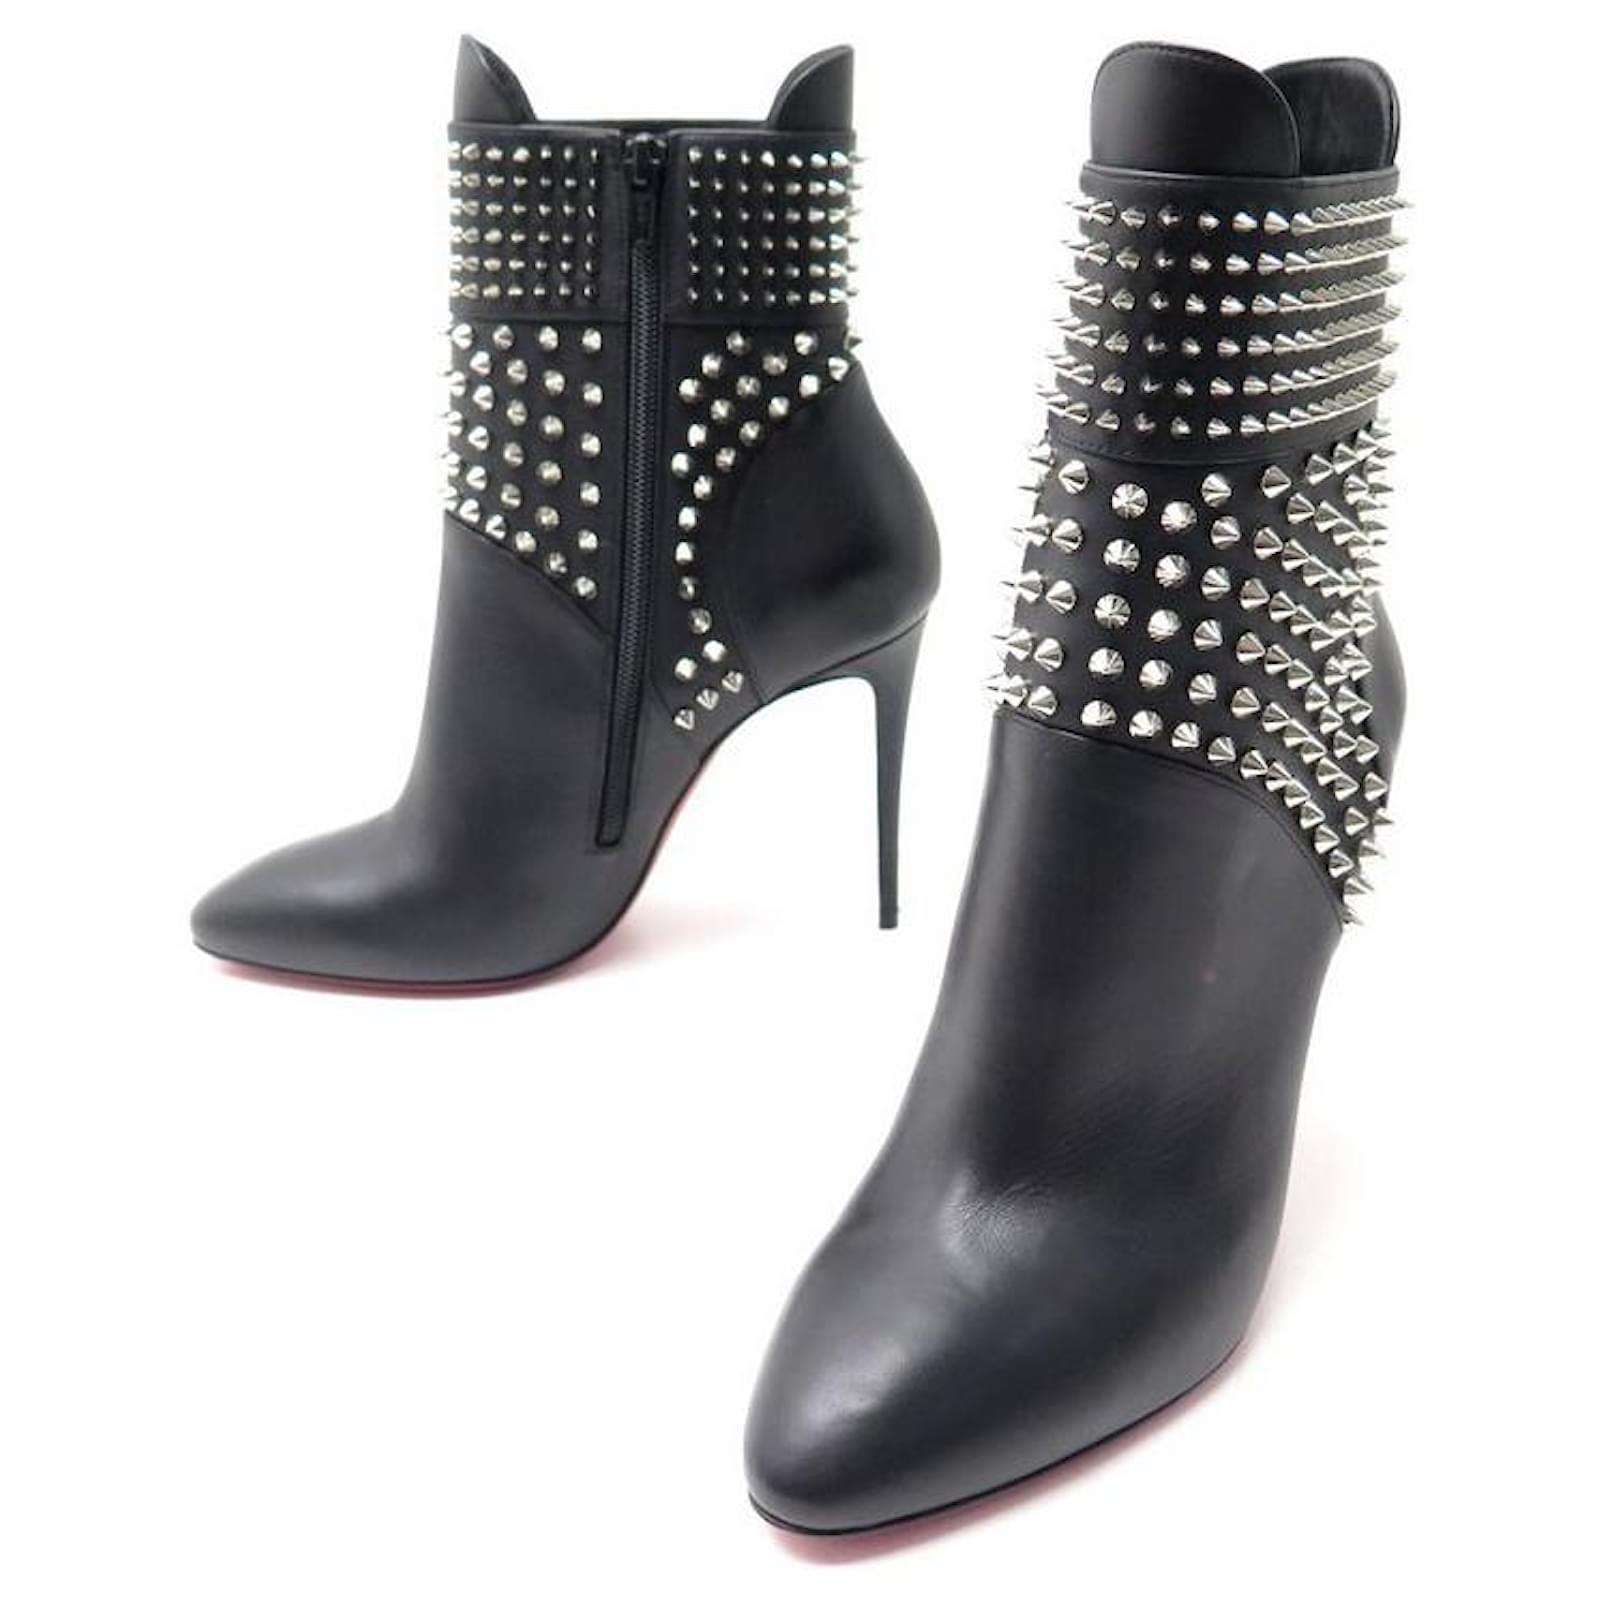 NEW CHRISTIAN LOUBOUTIN SHOES HUNGARIAN SPIKE ANKLE BOOTS 38.5 NEW